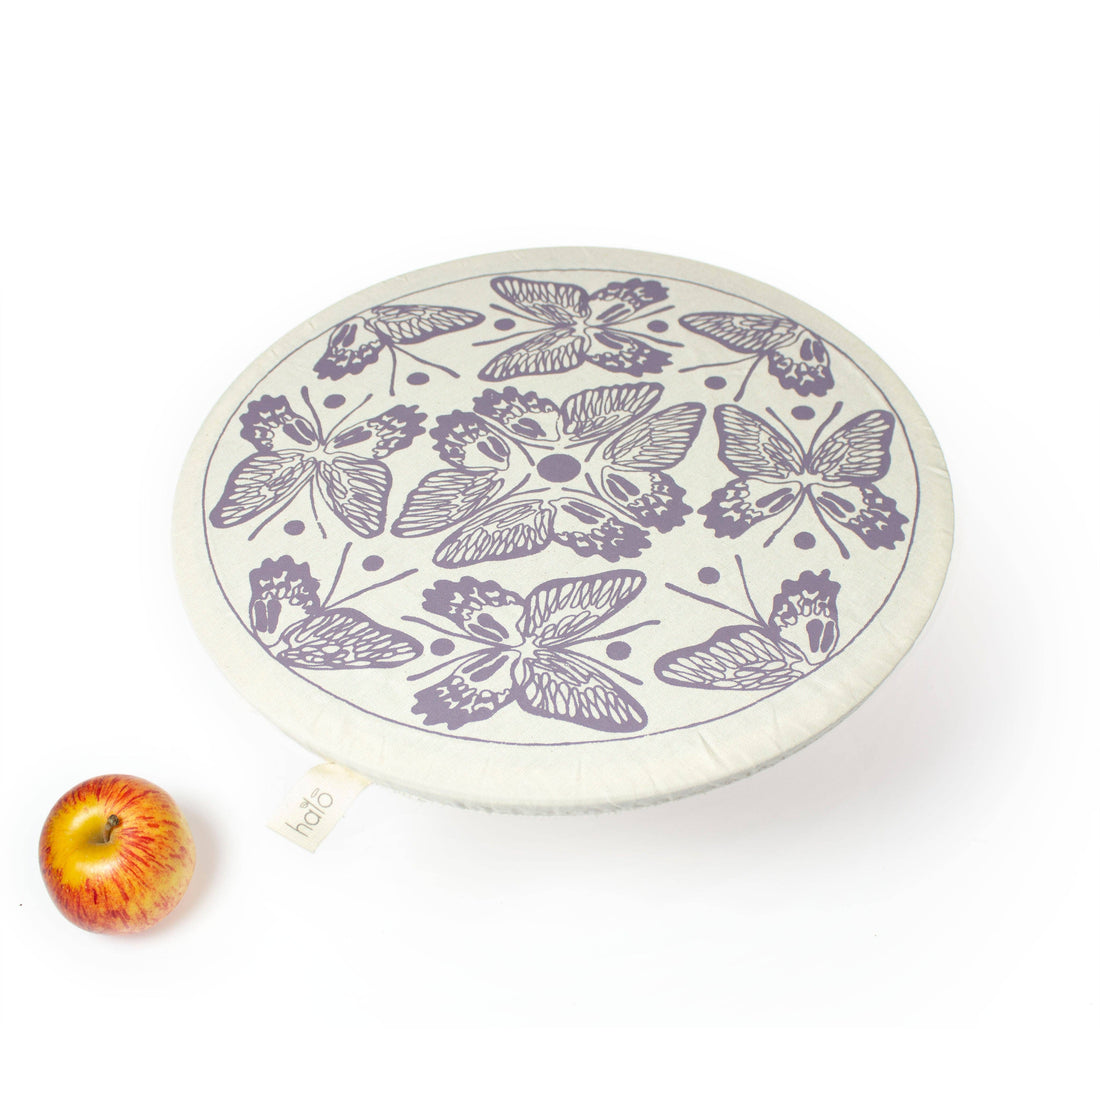 Beautiful Printed Dough Bowl Cover for Extra Large Bowls - Organic Cotton